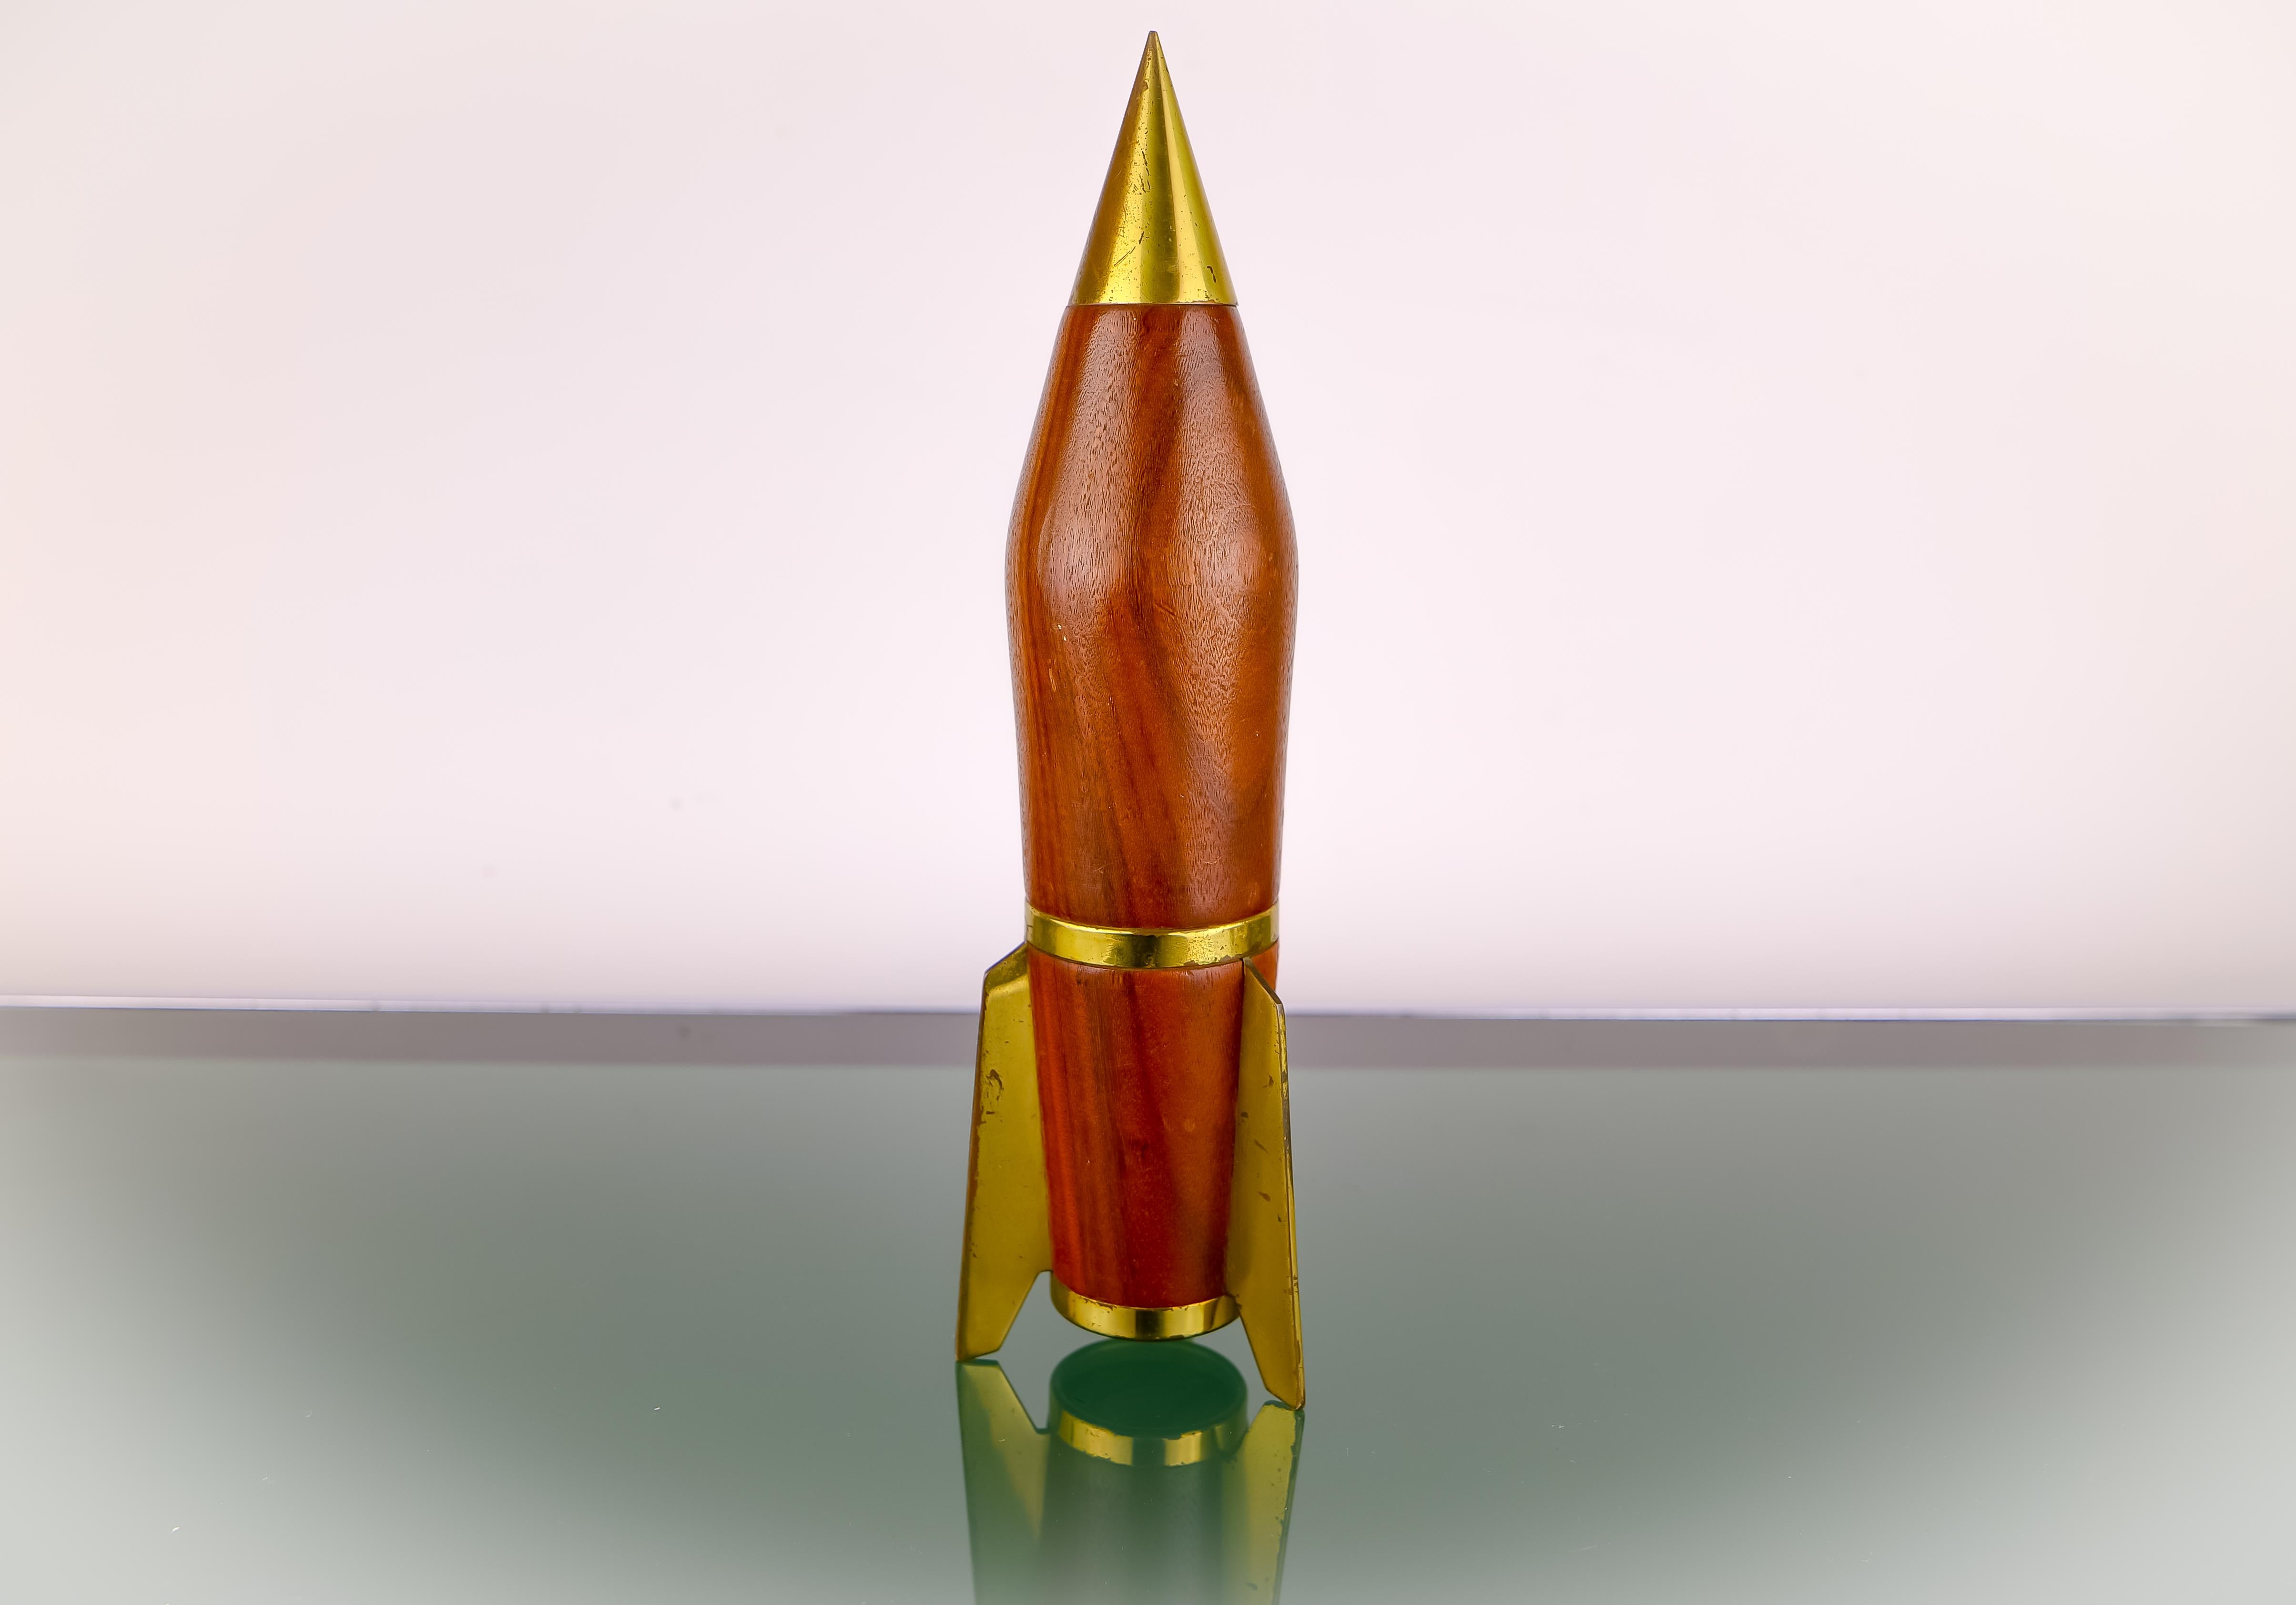 Peppermill in wood and brass details, Space Age style, in the shape of a skyrocket. Made in Italy, circa 1970.